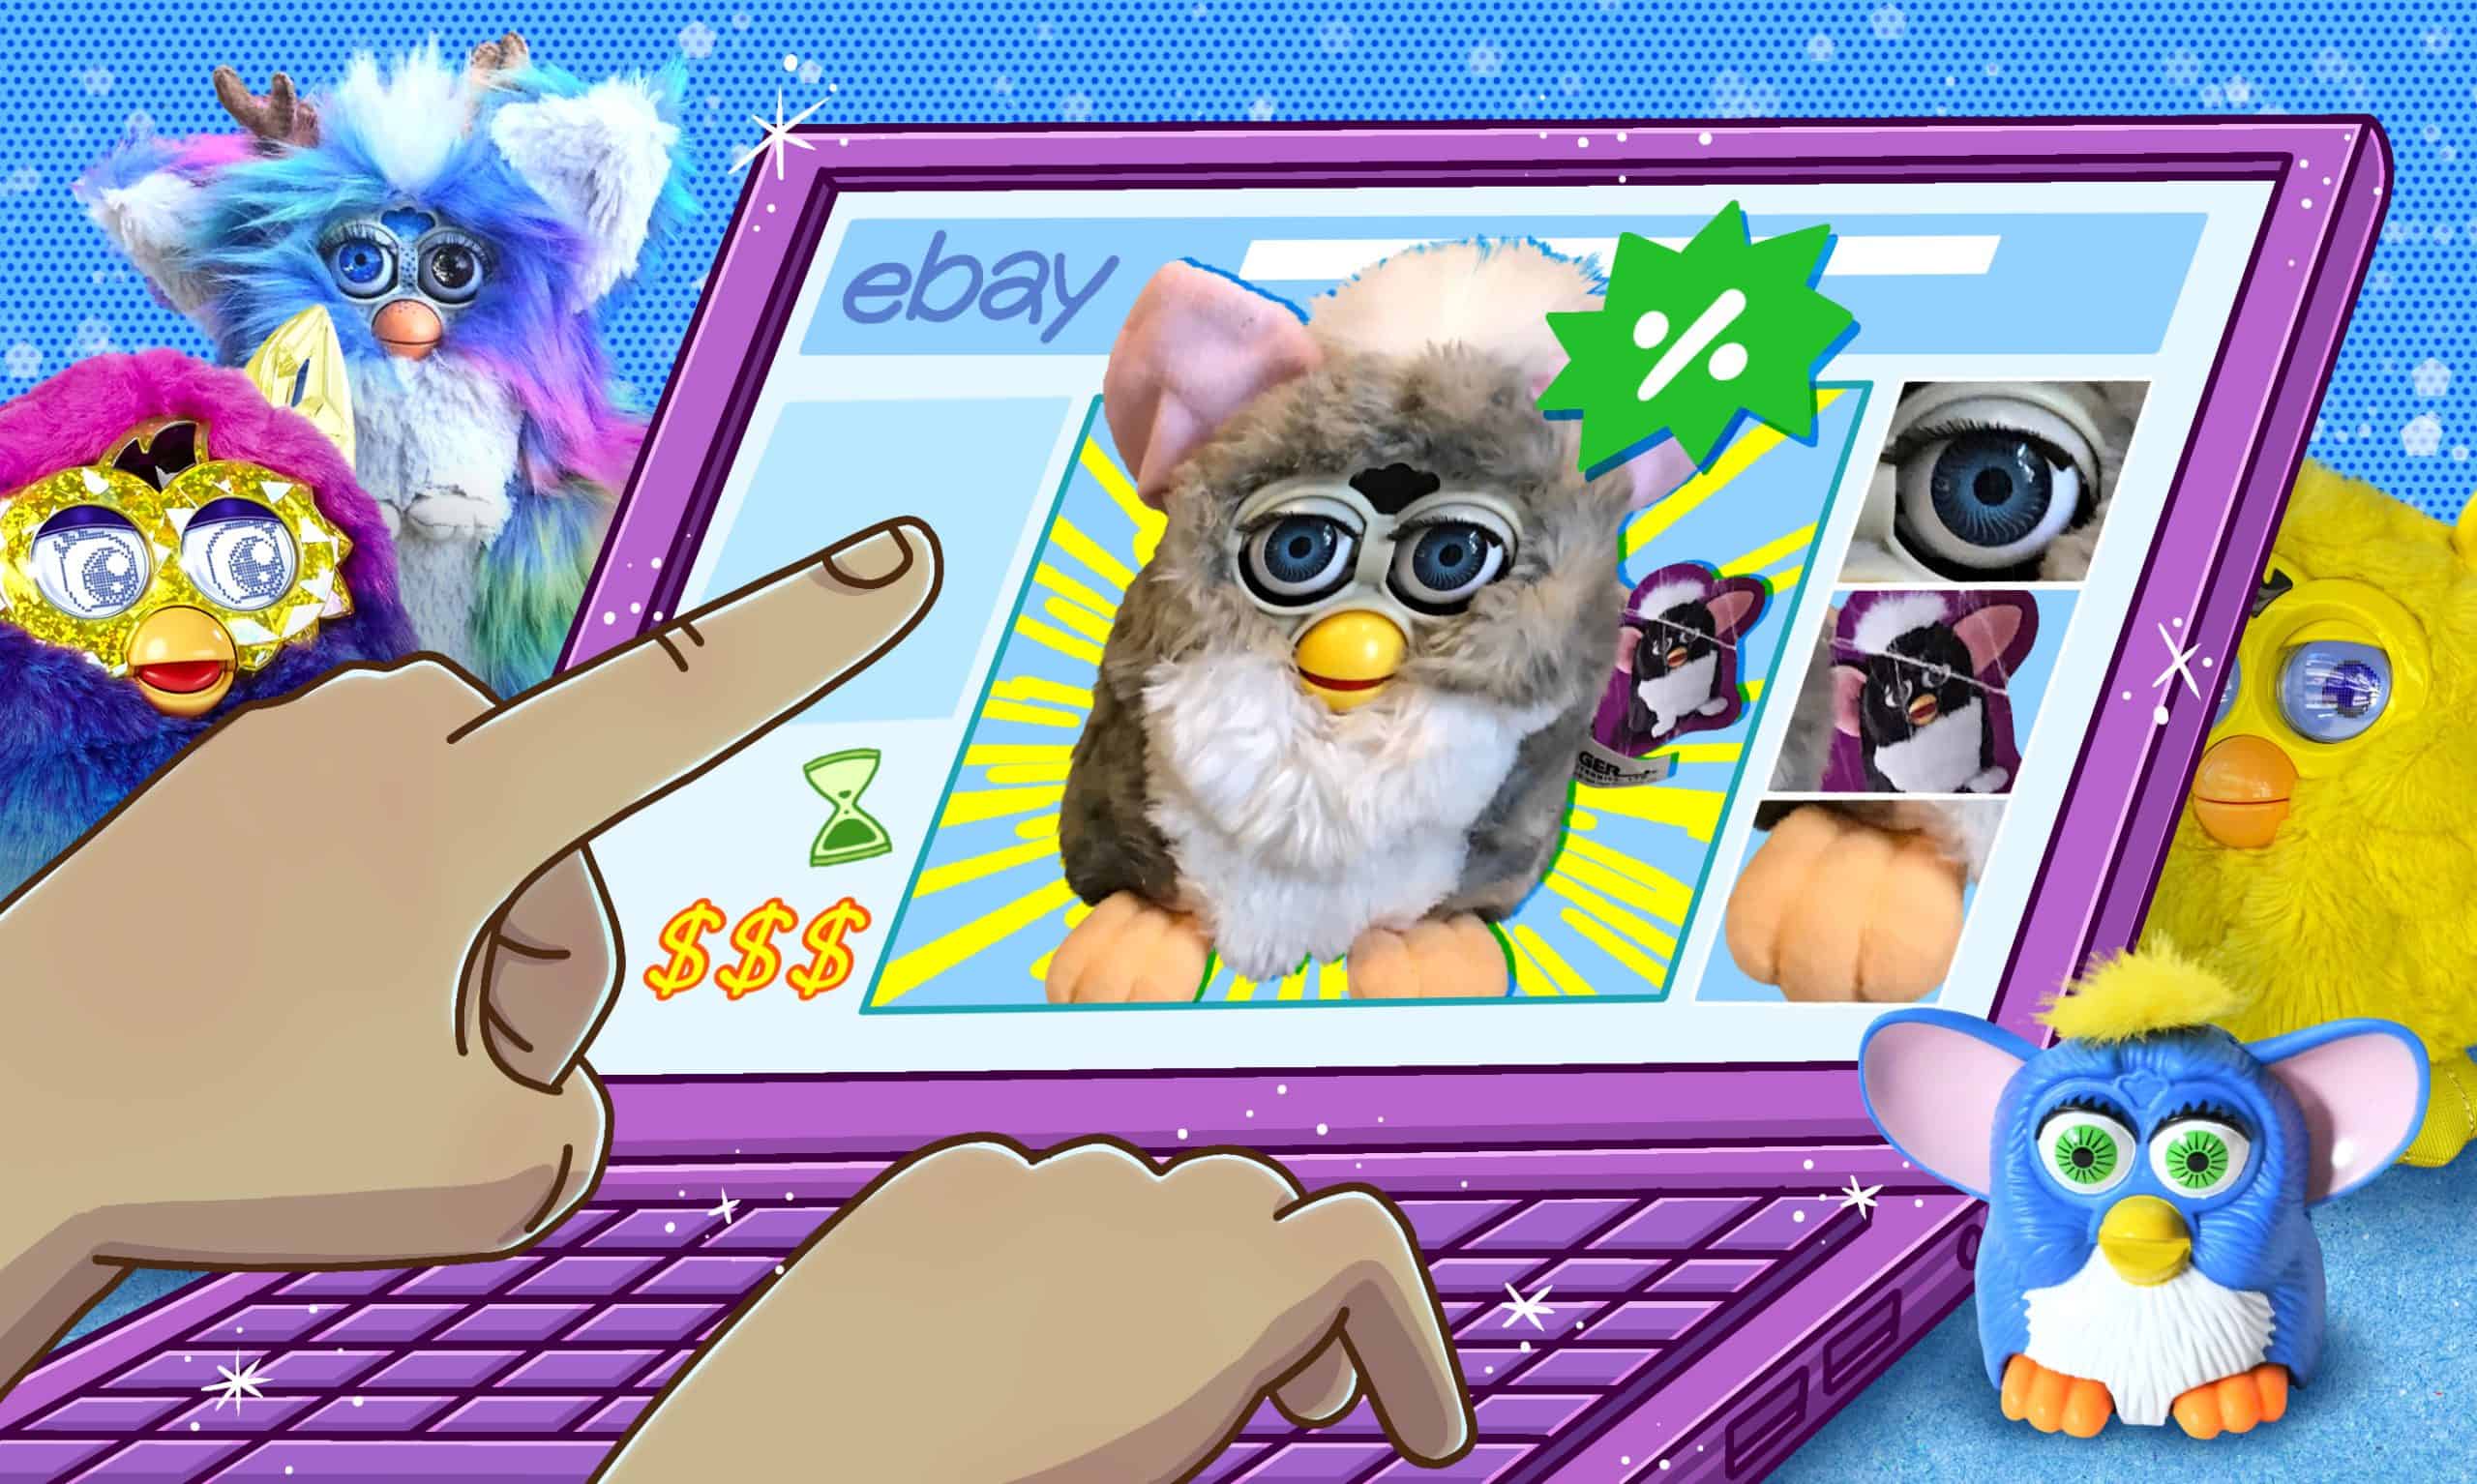 How to get your ultimate Furby for a deal on eBay